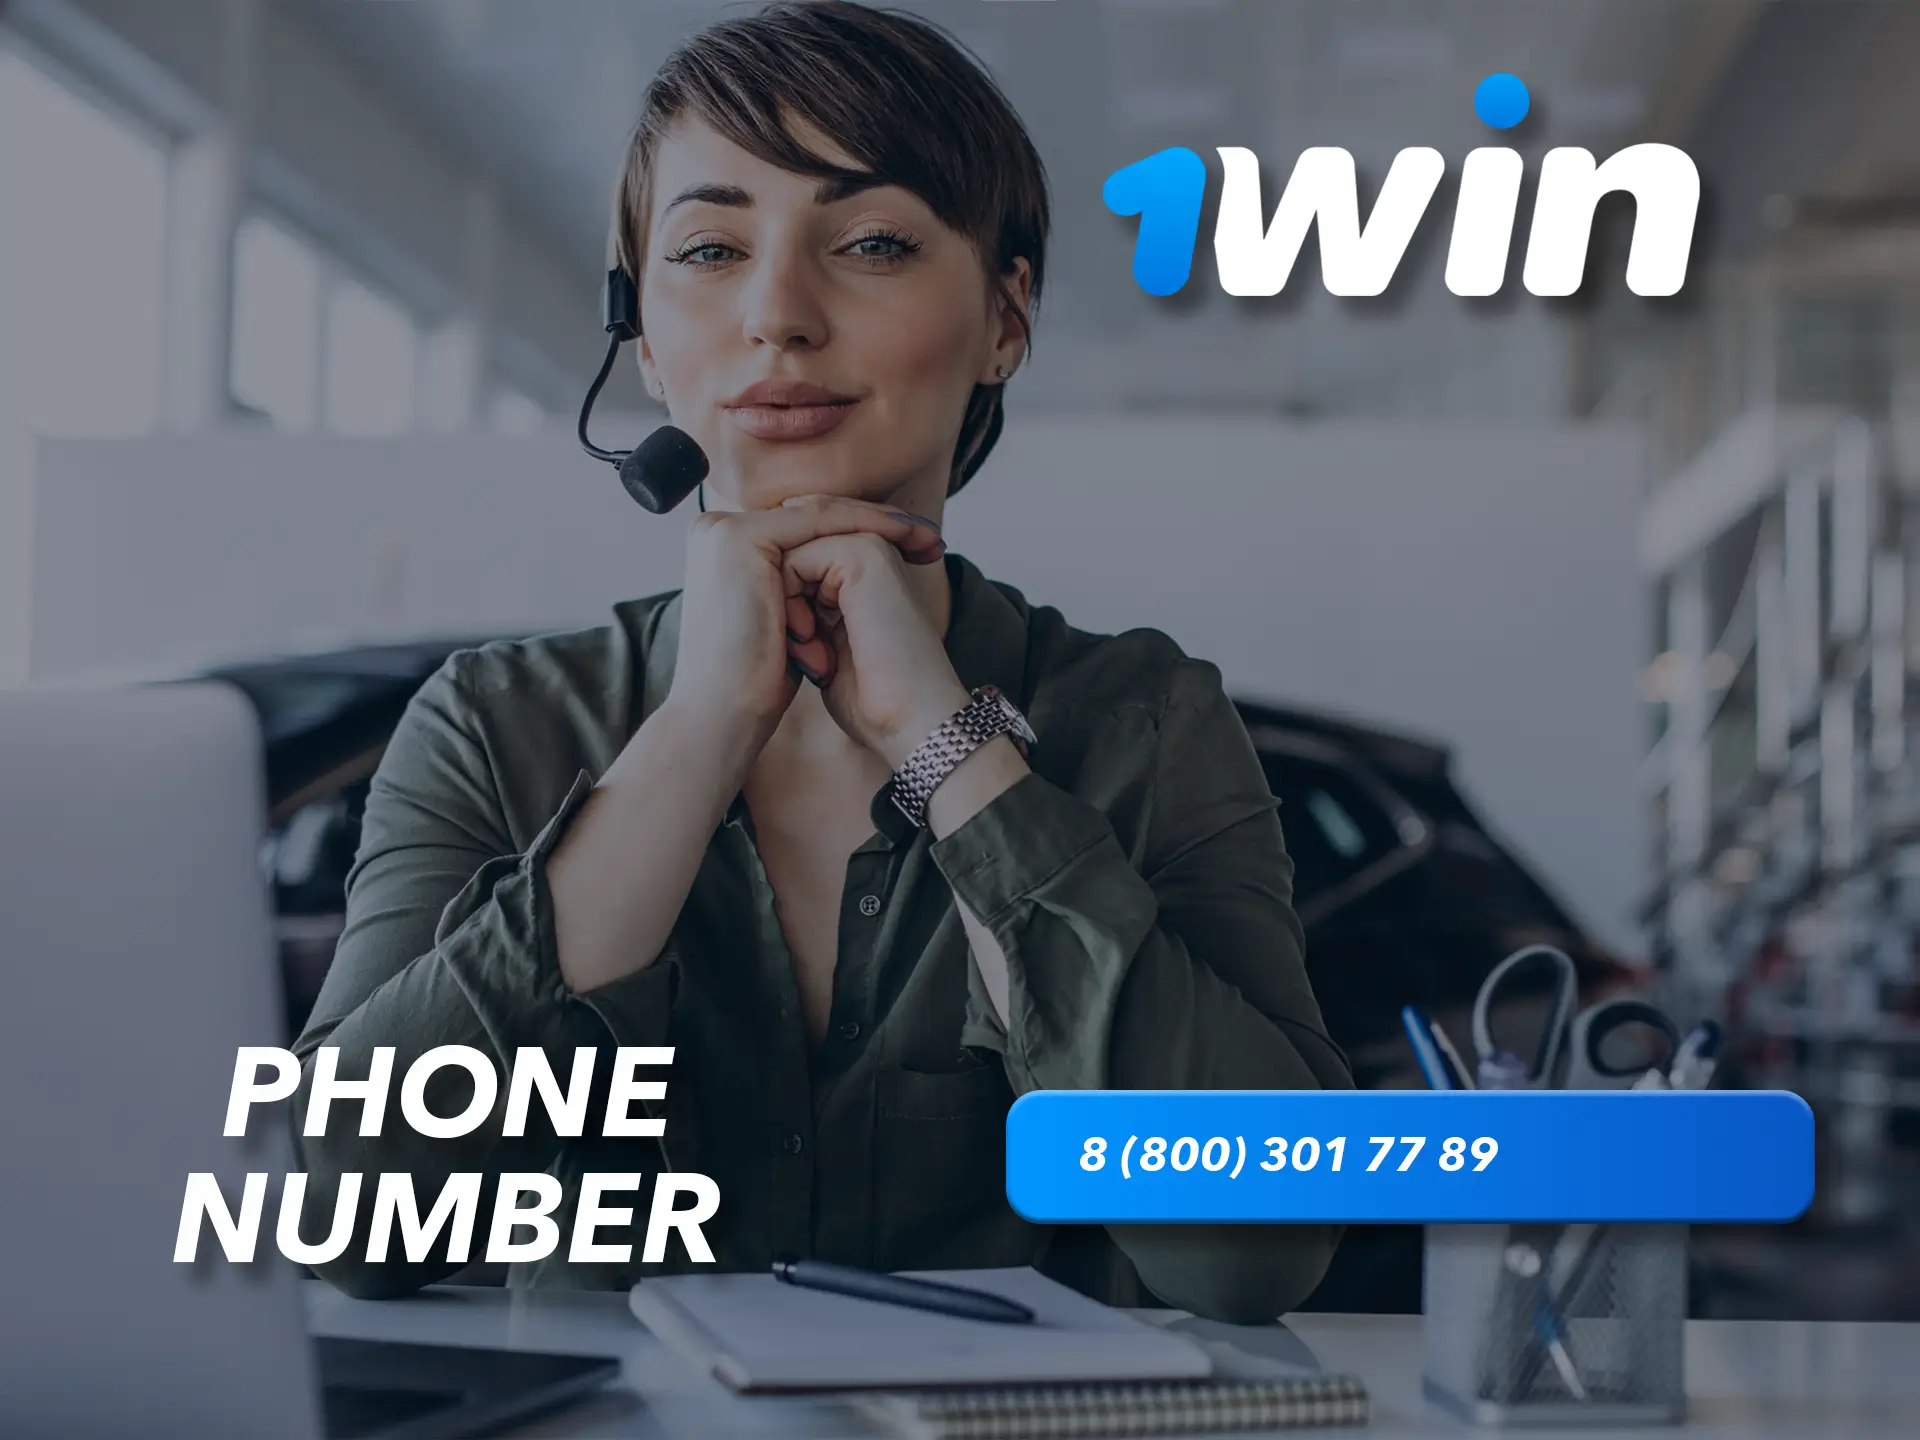 Ask your questions directly over the phone to a 1Win operator.